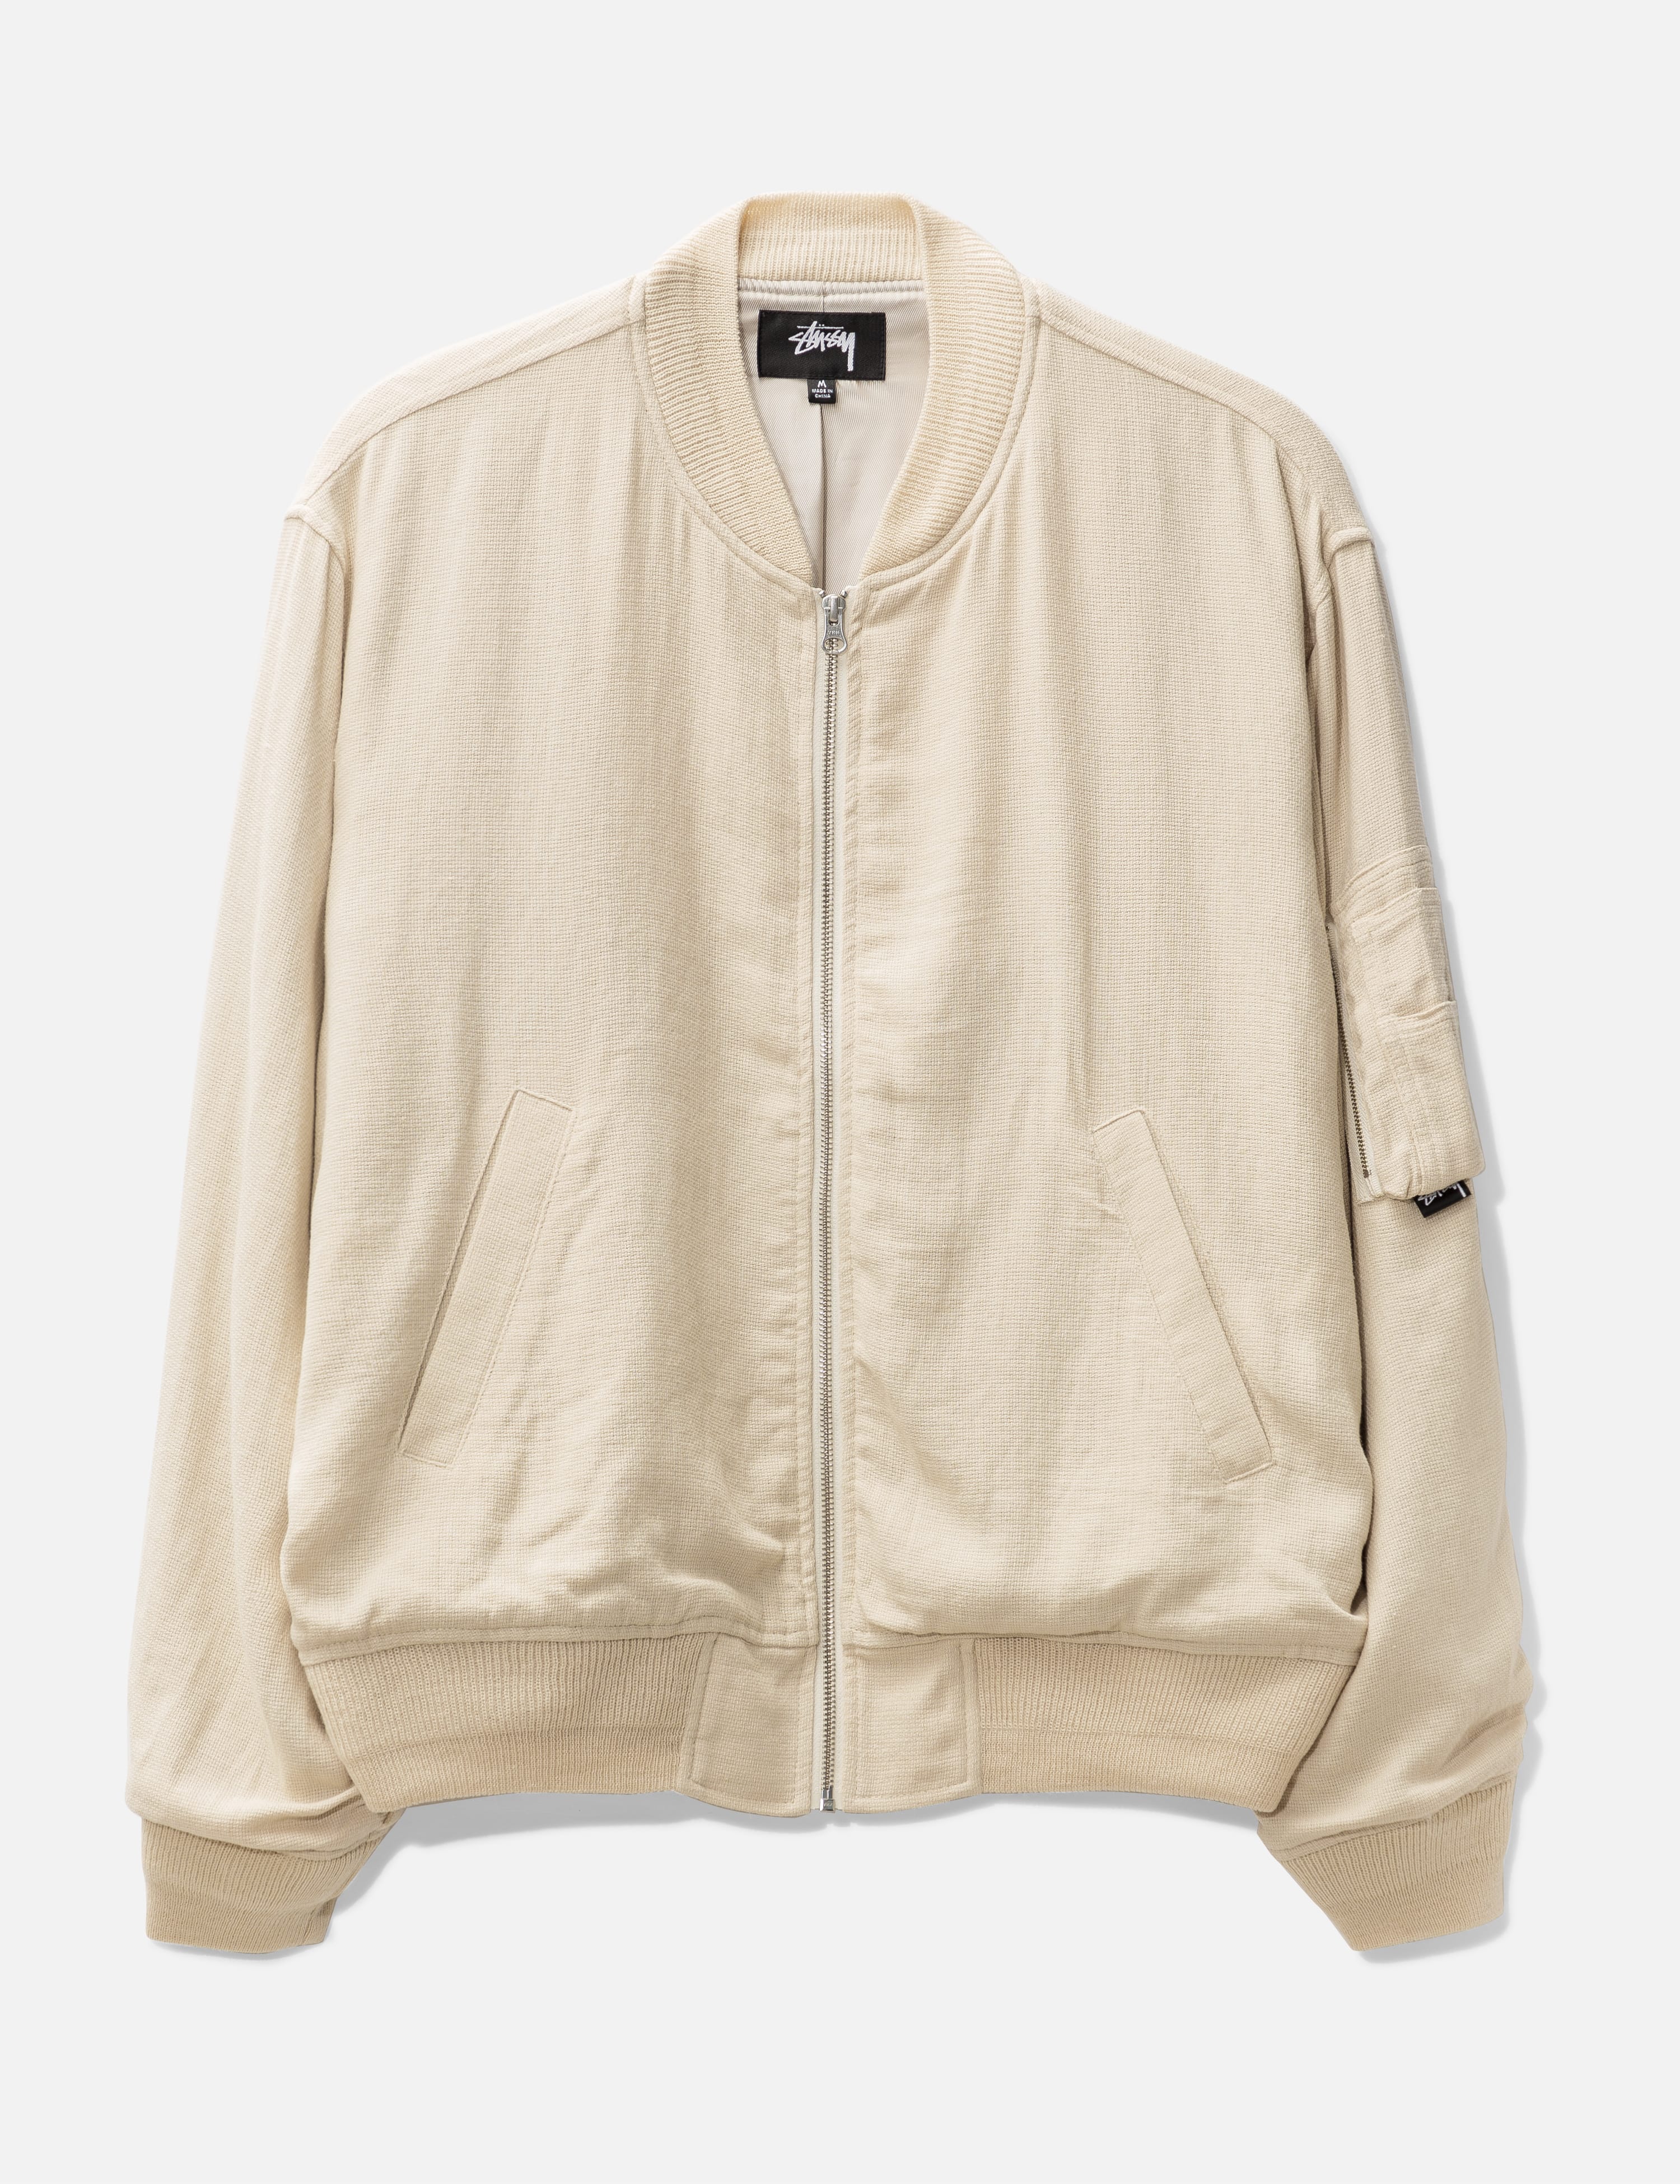 Stüssy - Linen Beach Bomber | HBX - Globally Curated Fashion and